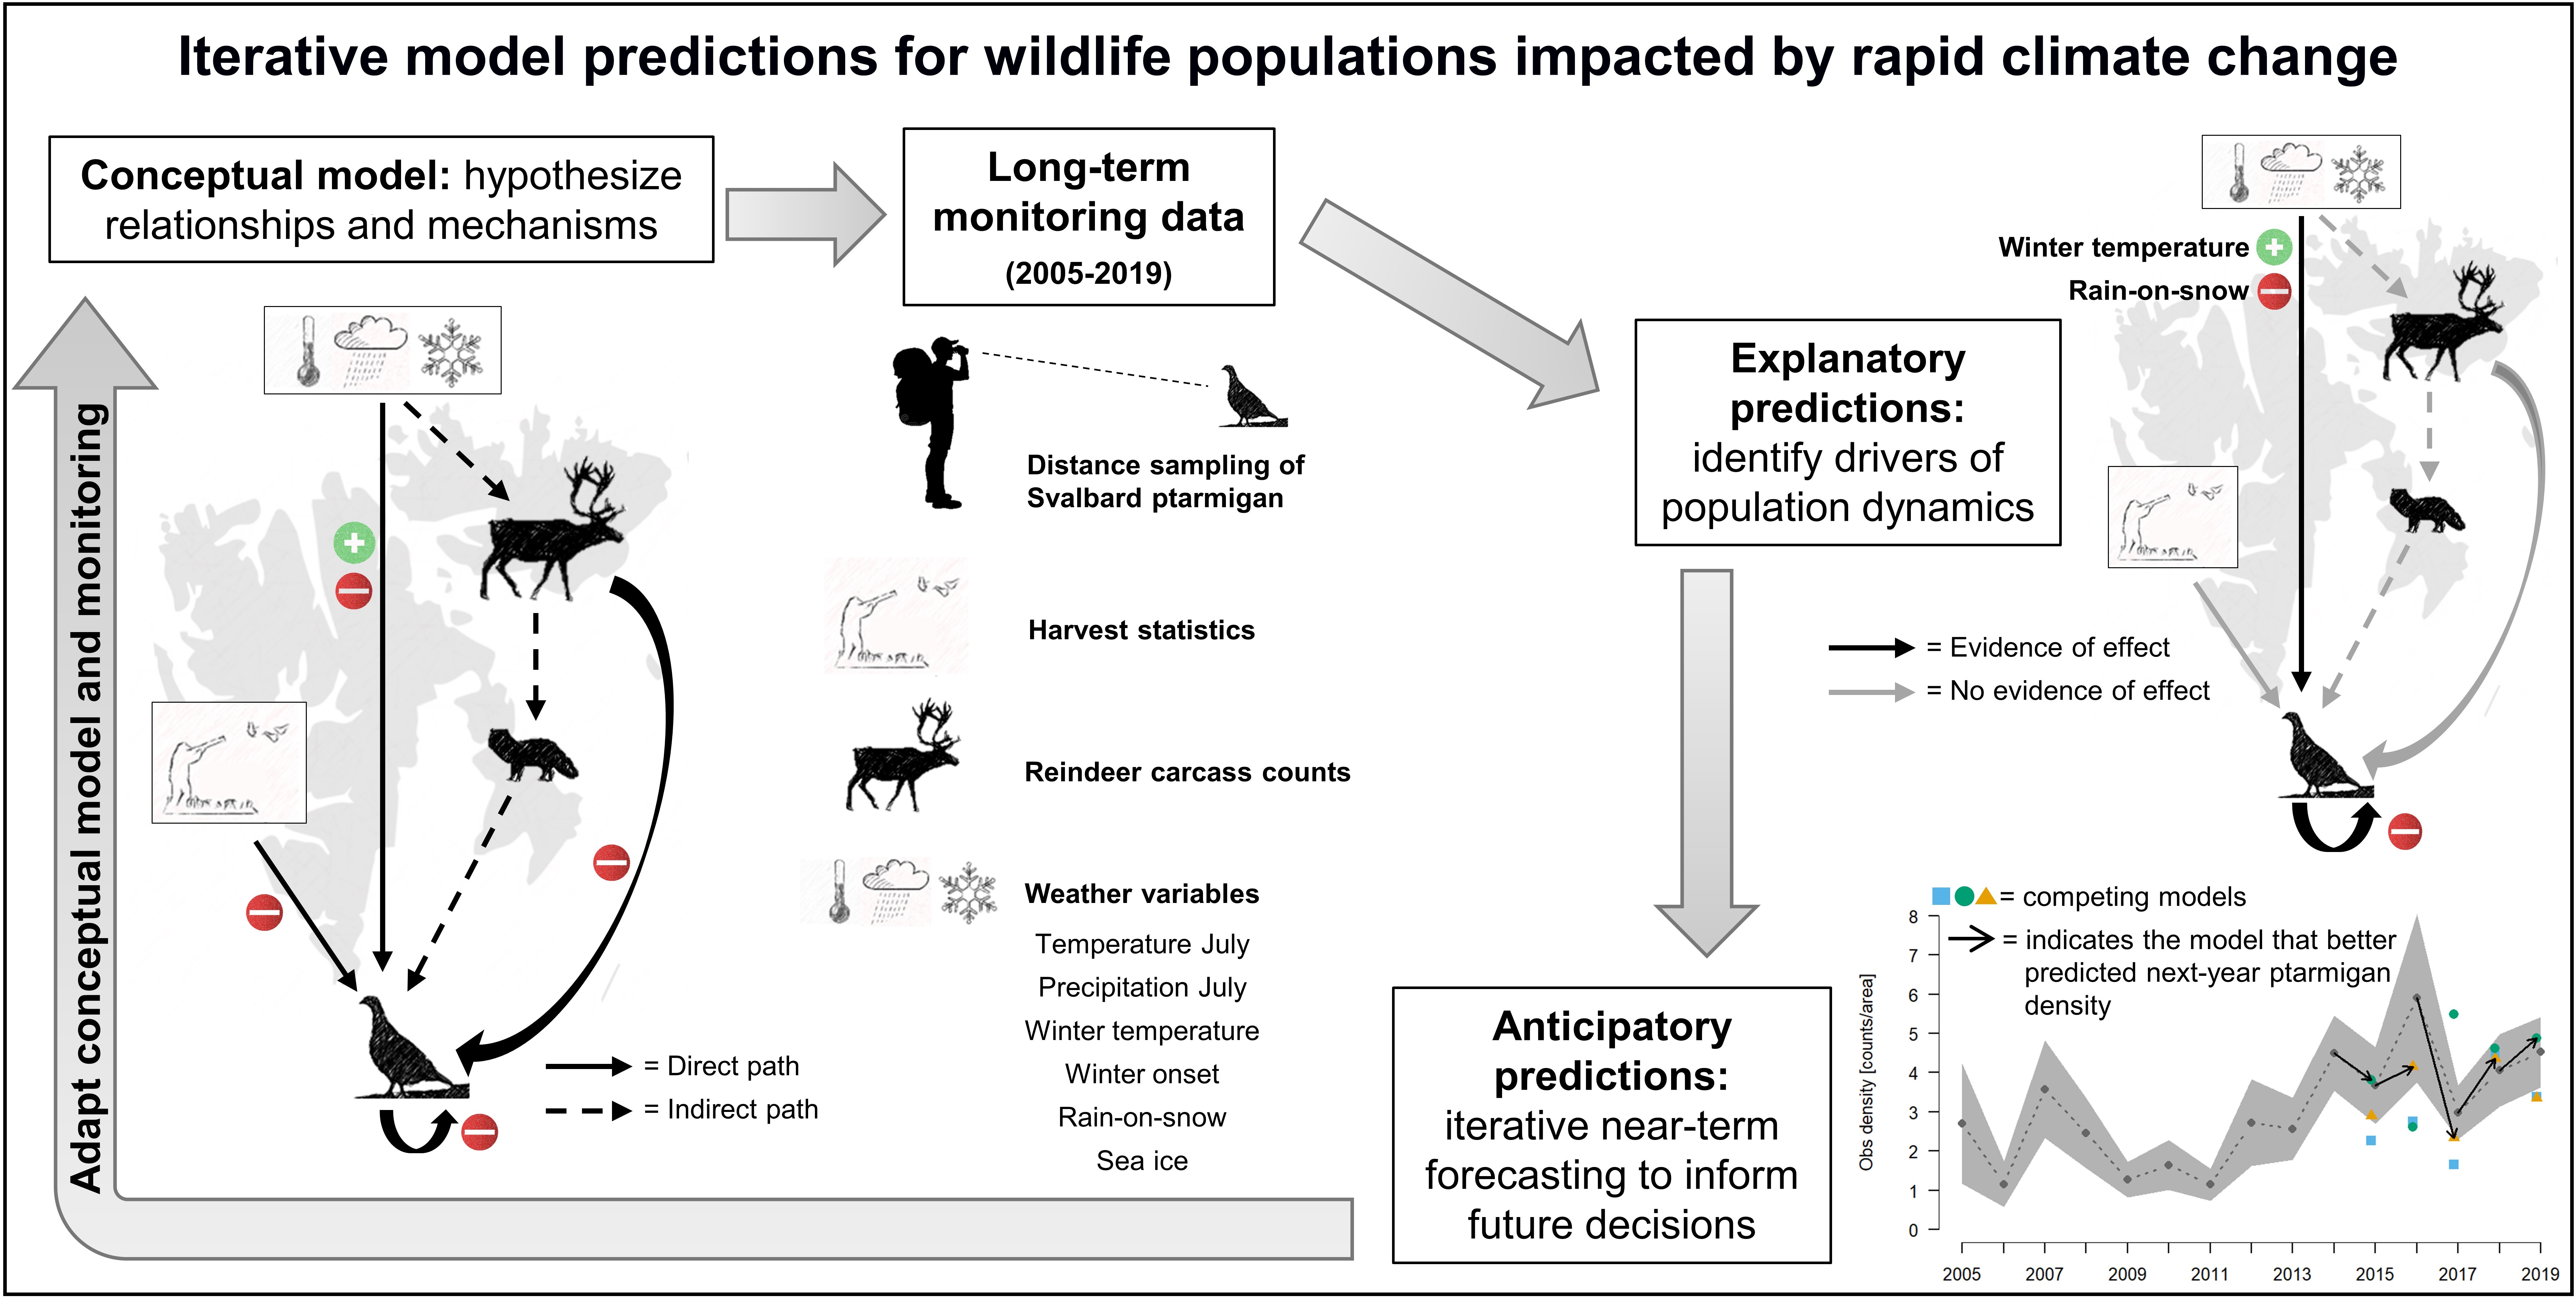 Graphical abstract describing the approach used to study population dynamics of Svalbard ptarmigan. First, researchers carefully laid out the hypothesized impacts of several biotic and abiotic factors on ptarmigan dynamics and visualized them through a conceptual model. Then, they fitted state-space models to 15 years of ptarmigan monitoring data to: 1) quantify the effects of potential drivers of population dynamics (explanatory predictions) and 2) assess the ability of candidate models of increasing complexity to forecast next‐year population density (anticipatory predictions).